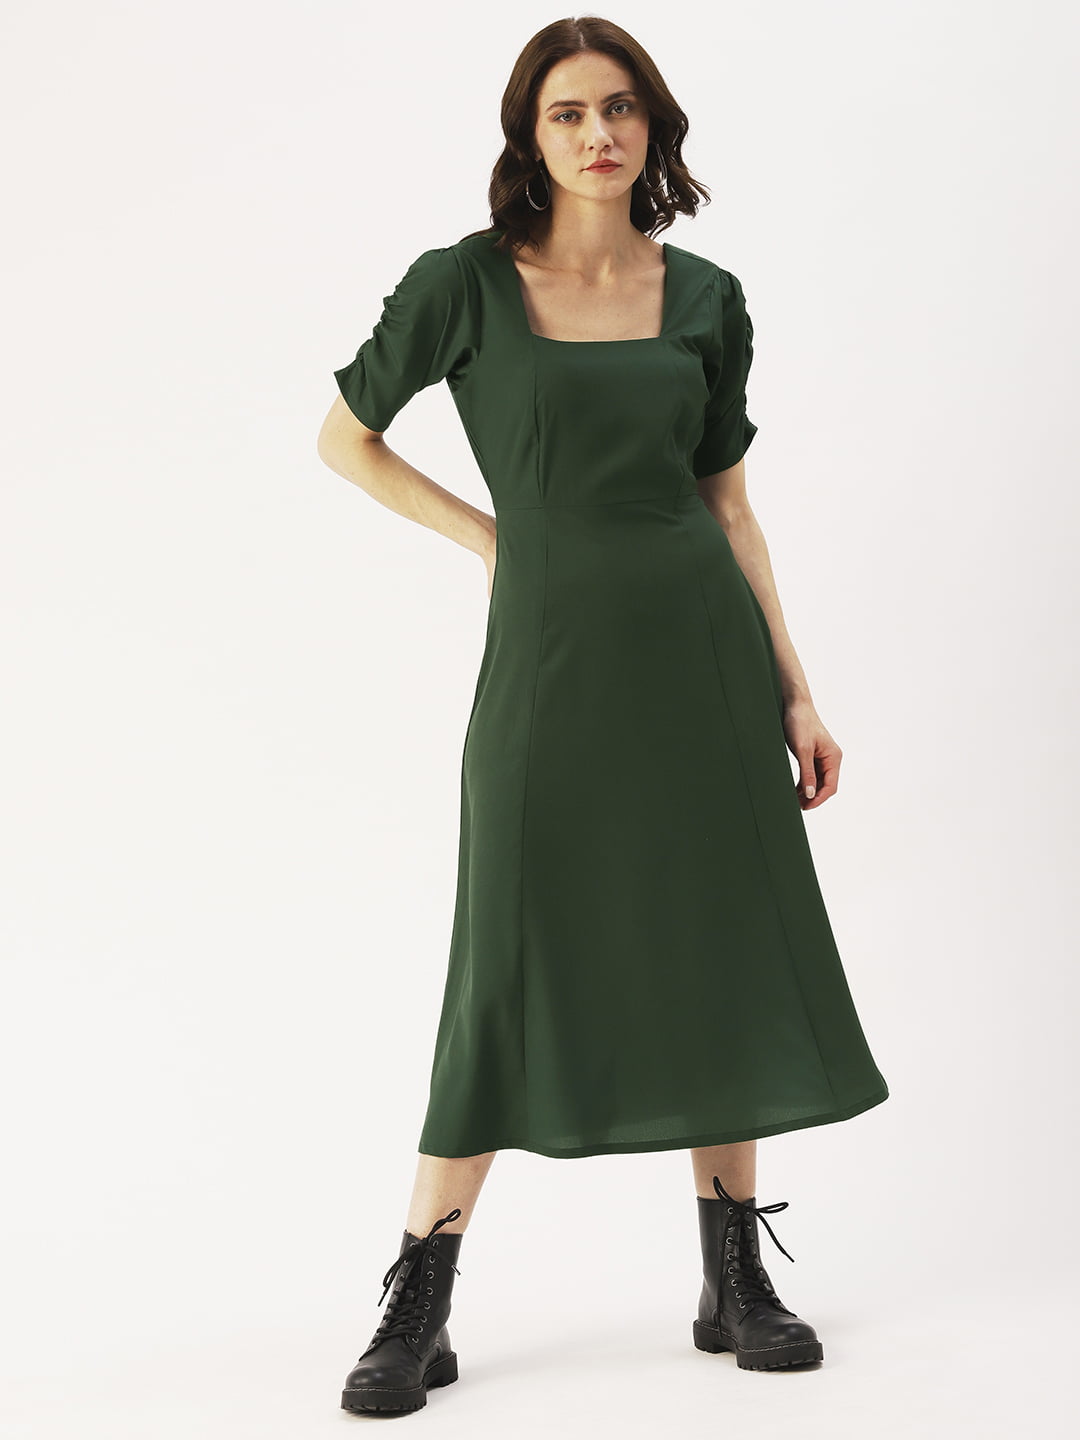 Top more than 124 poly crepe dress